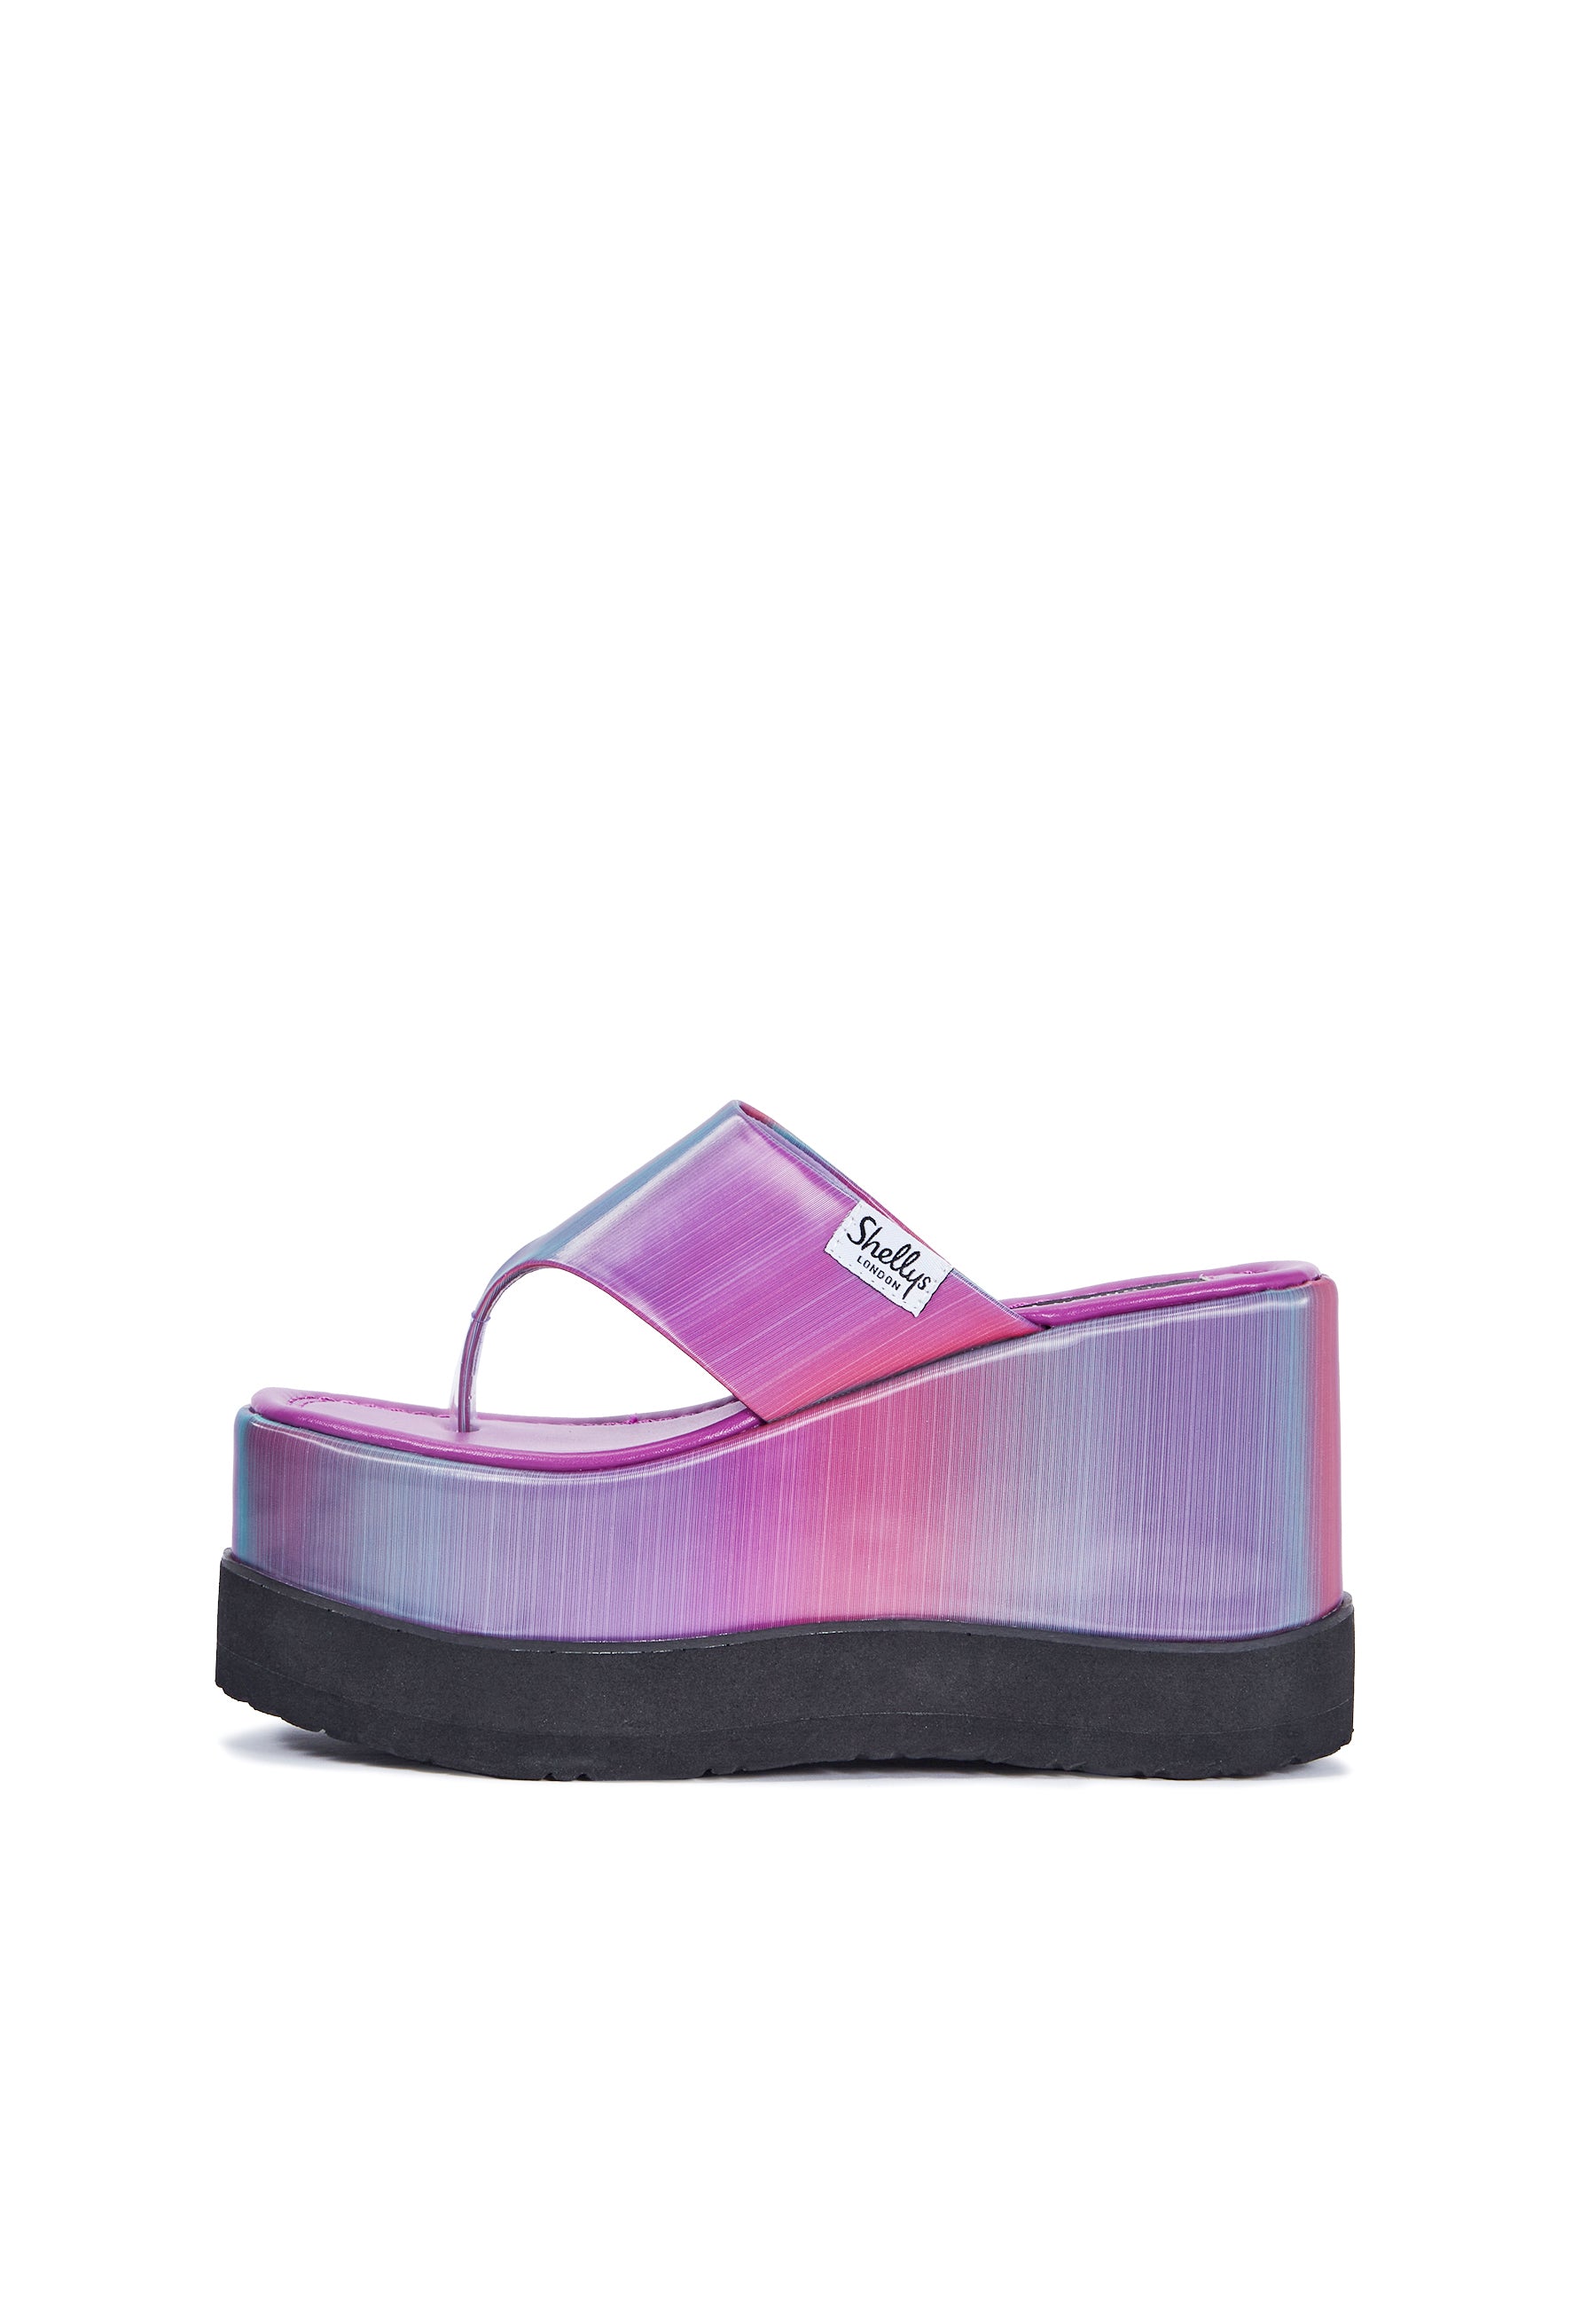 KLUB LILAC HOLOGRAPHIC PLATFROM WEDGE